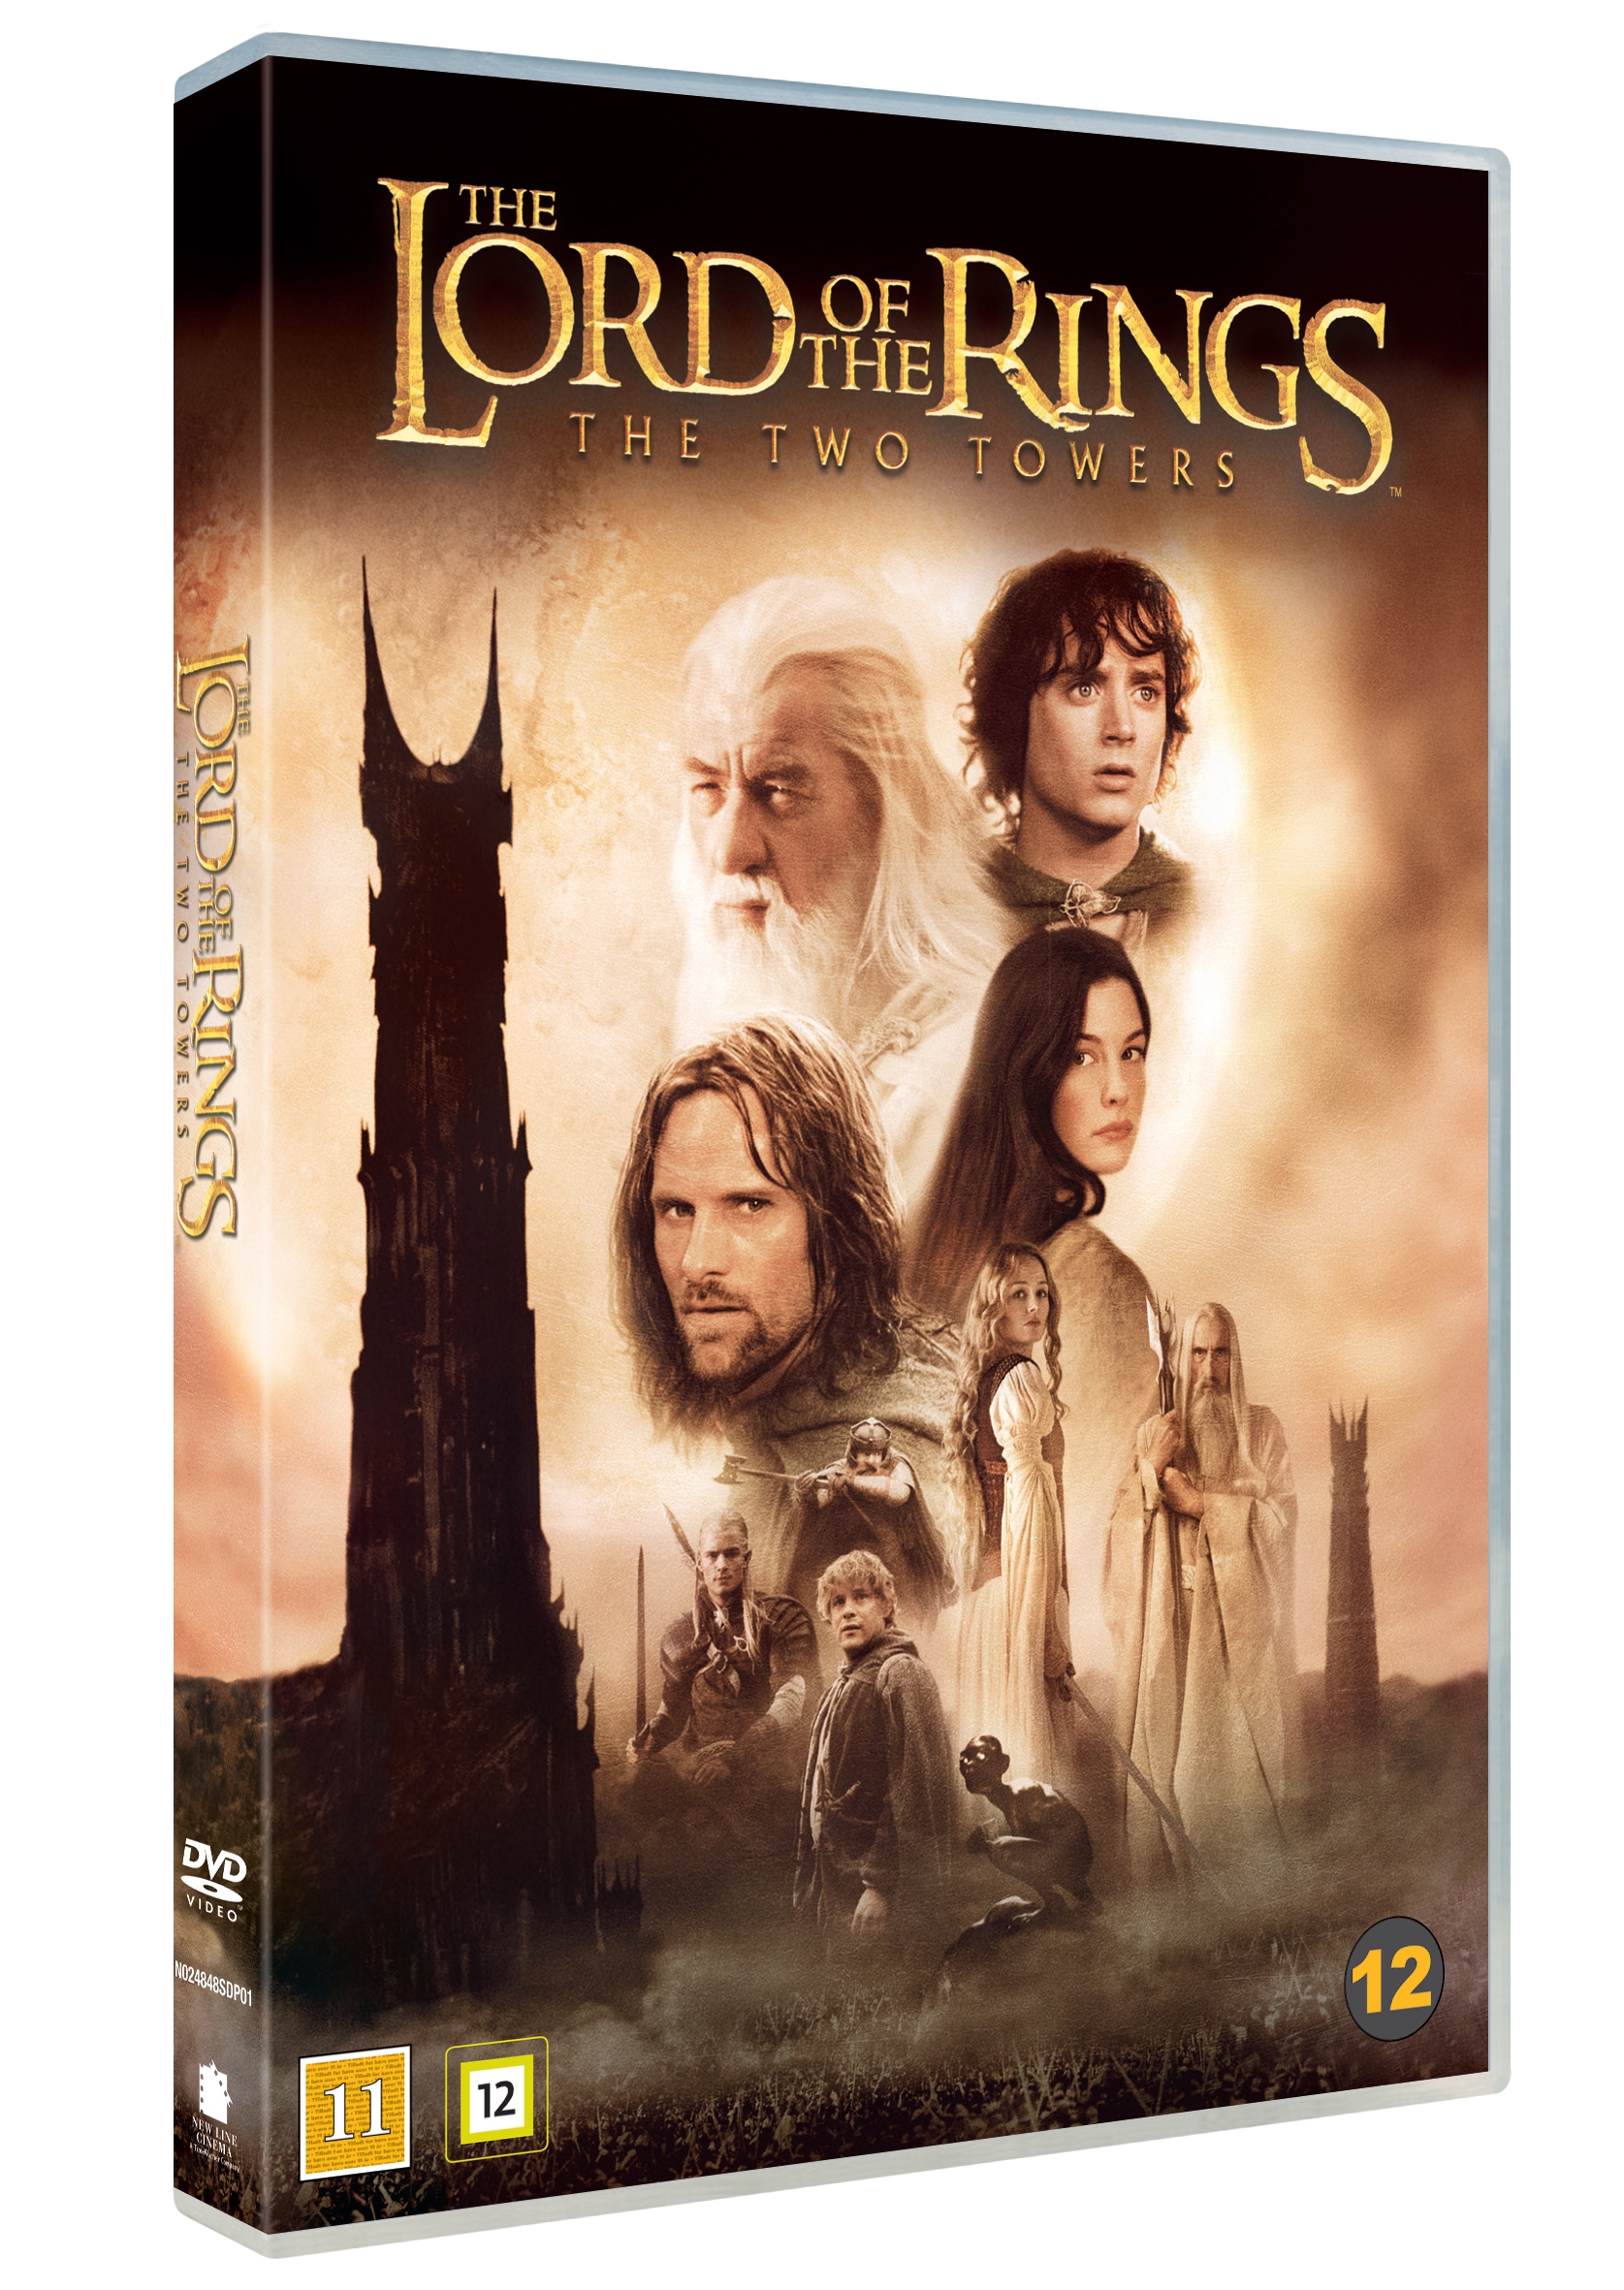 instal the last version for windows The Lord of the Rings: The Two Towers